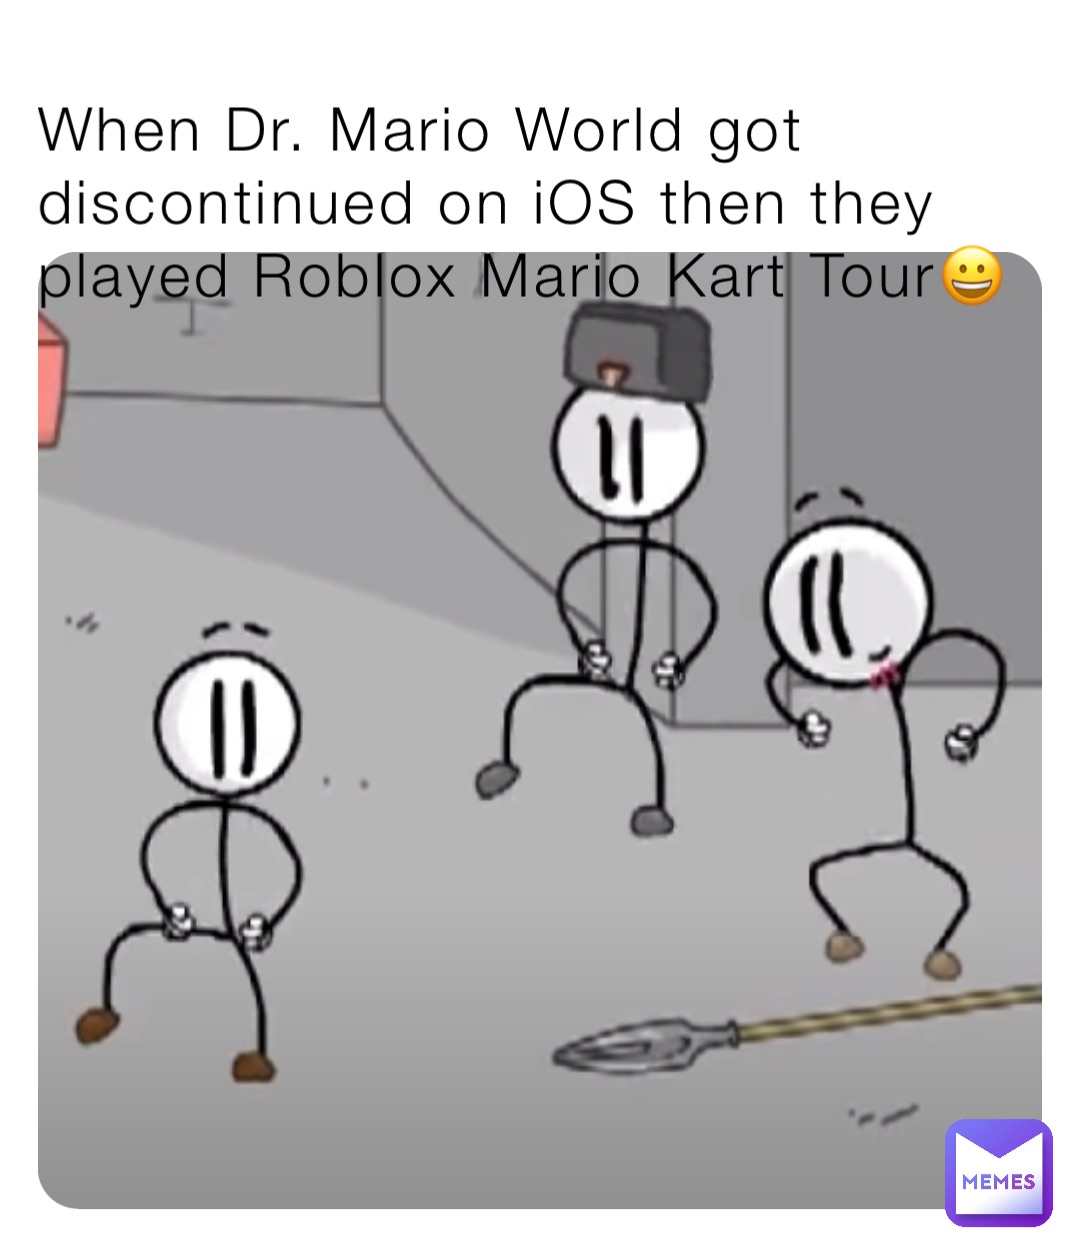 When Dr. Mario World got discontinued on iOS then they played Roblox Mario Kart Tour😀